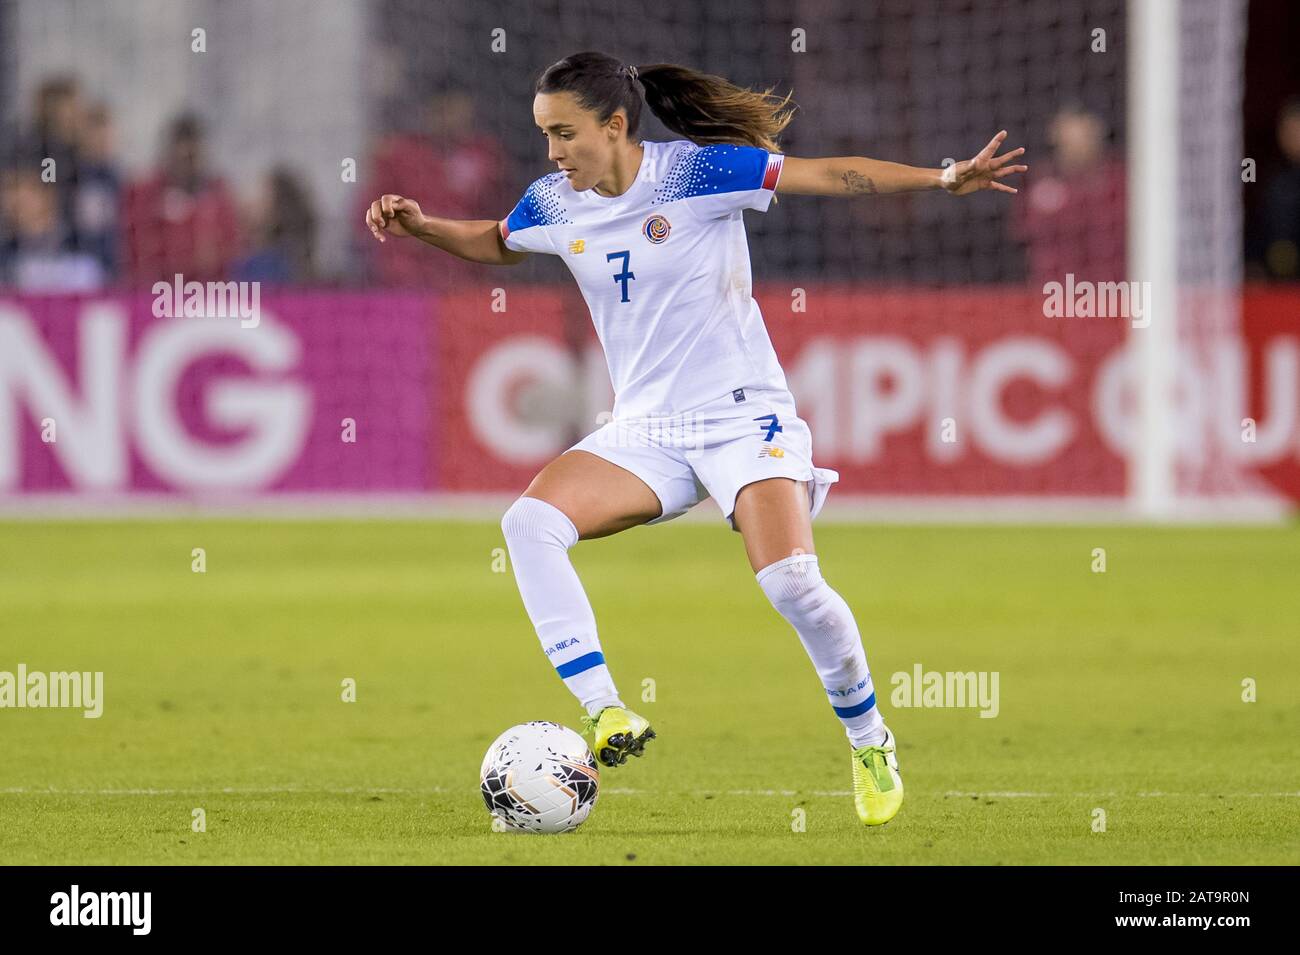 Houston, TX, USA. 31st Jan, 2020. Costa Rica forward Melissa Herrera (7) controls the ball during the 2nd half of a CONCACAF Olympic Qualifying soccer match between Haiti and Costa Rica at BBVA Stadium in Houston, TX. Costa Rica won the game 2 to 0.Trask Smith/CSM/Alamy Live News Stock Photo